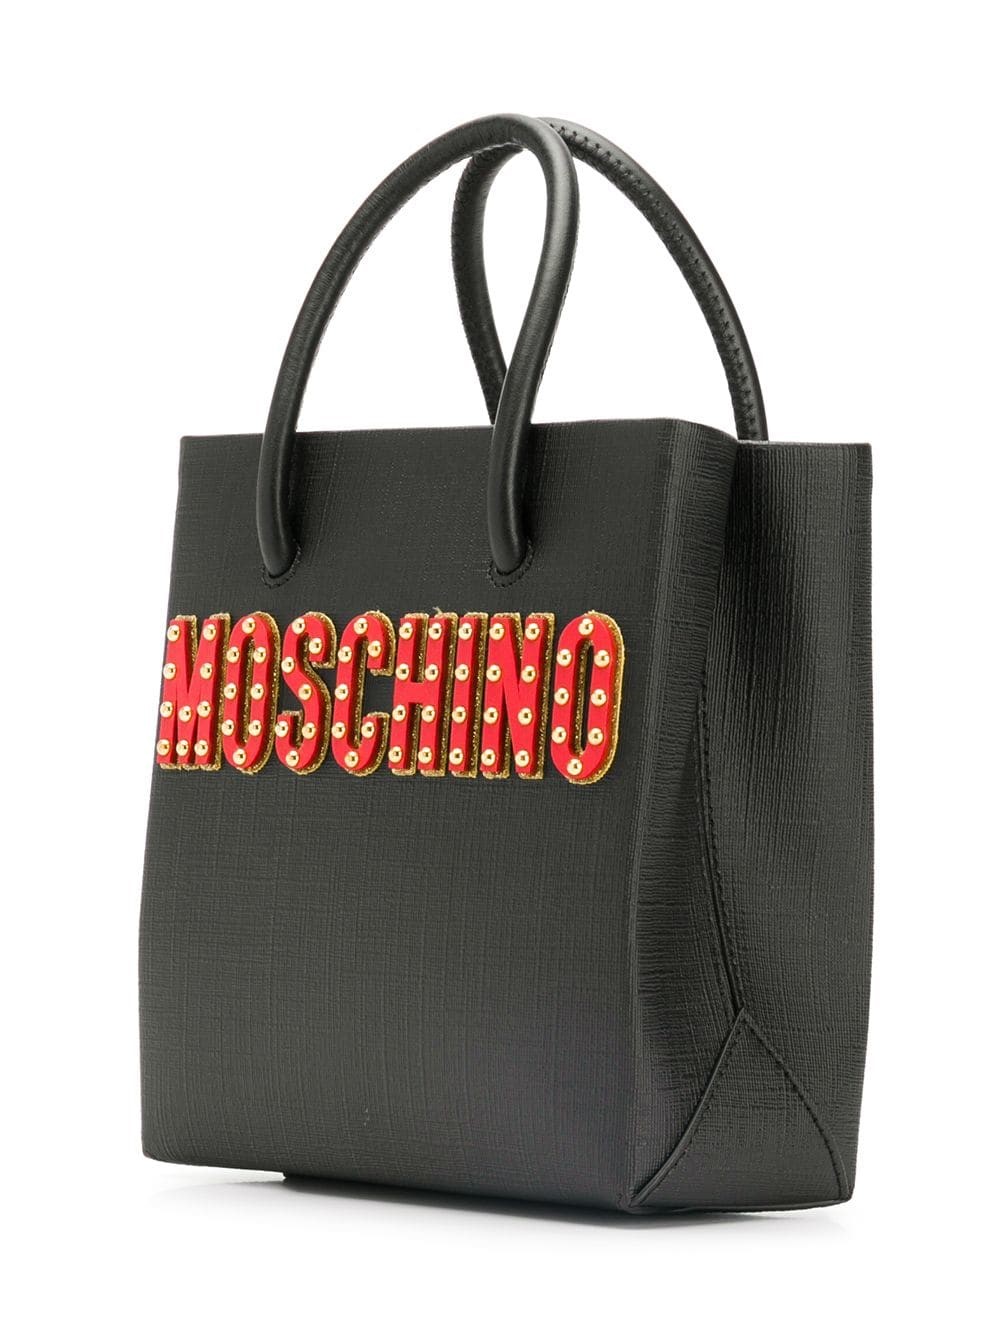 moschino TEDDY BEAR TOTE available on montiboutique.com - 26145